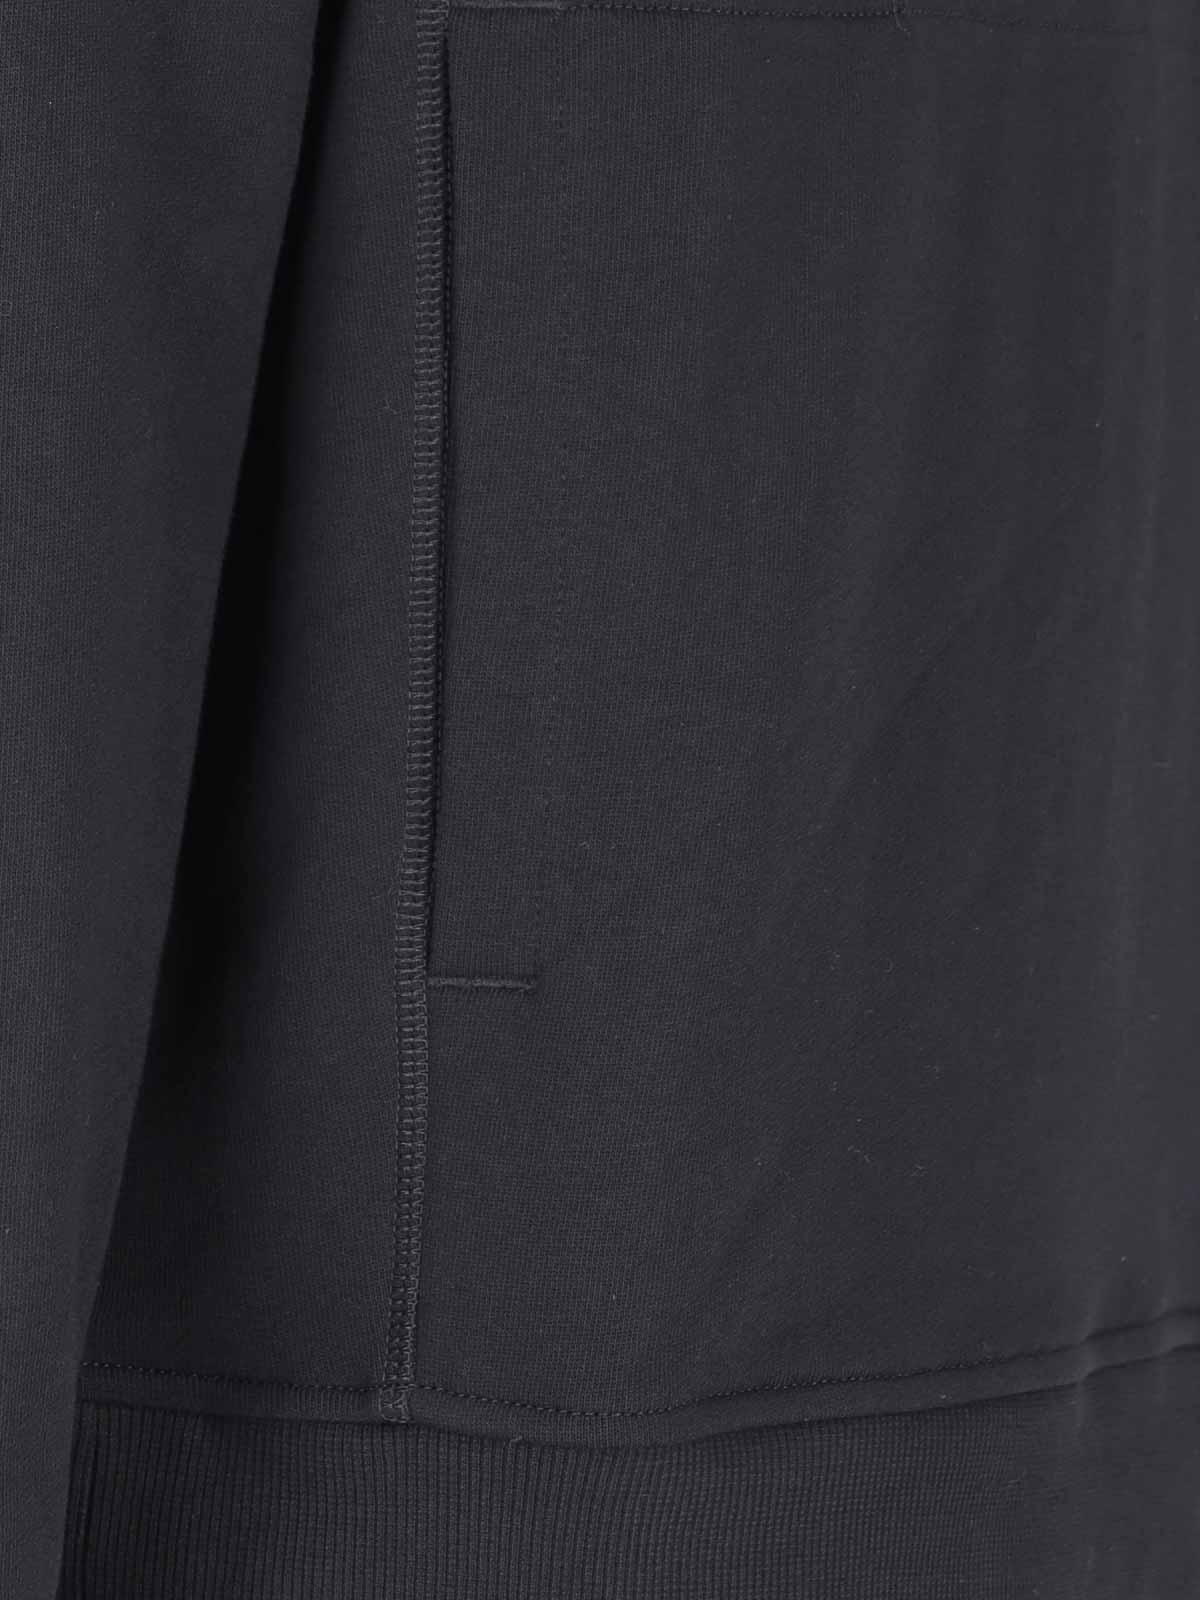 Shop Craig Green Hooded Sweatshirt With Laces In Negro